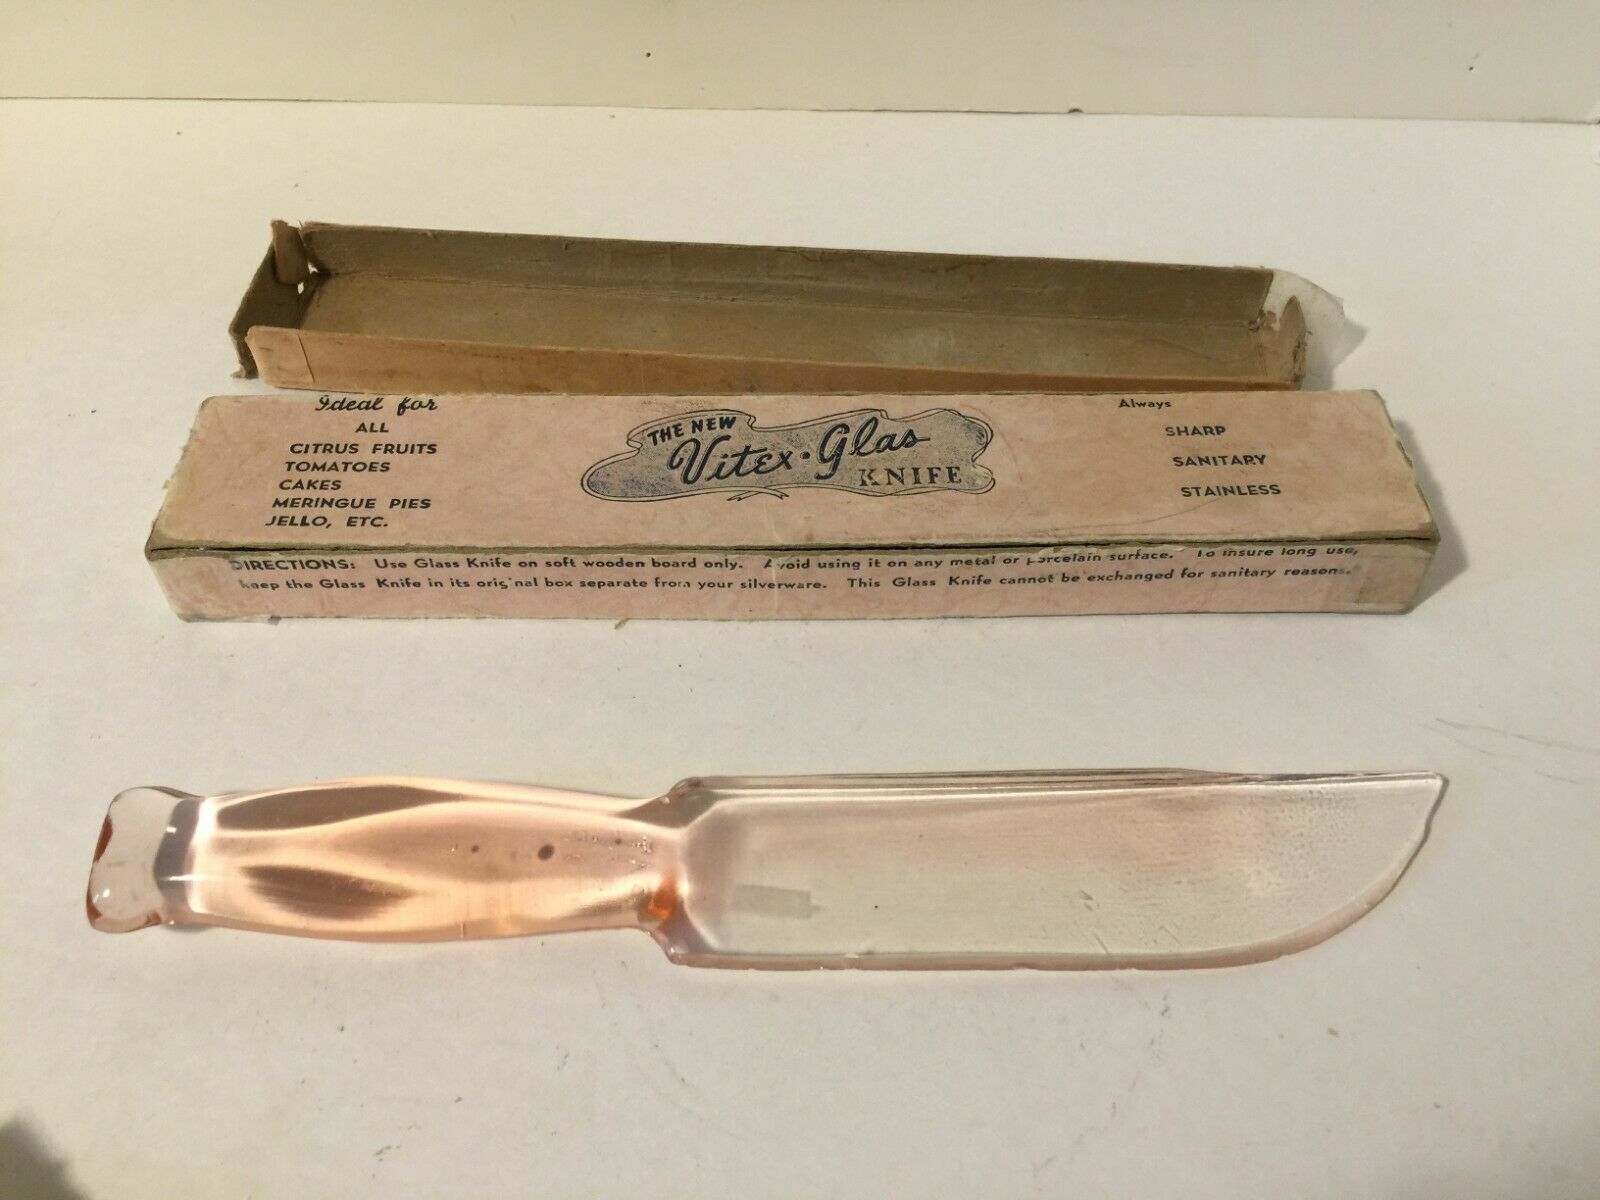 Vintage Vitex-glas Pink Depression Glass Fruit And Cake Kitchen Knife With Box